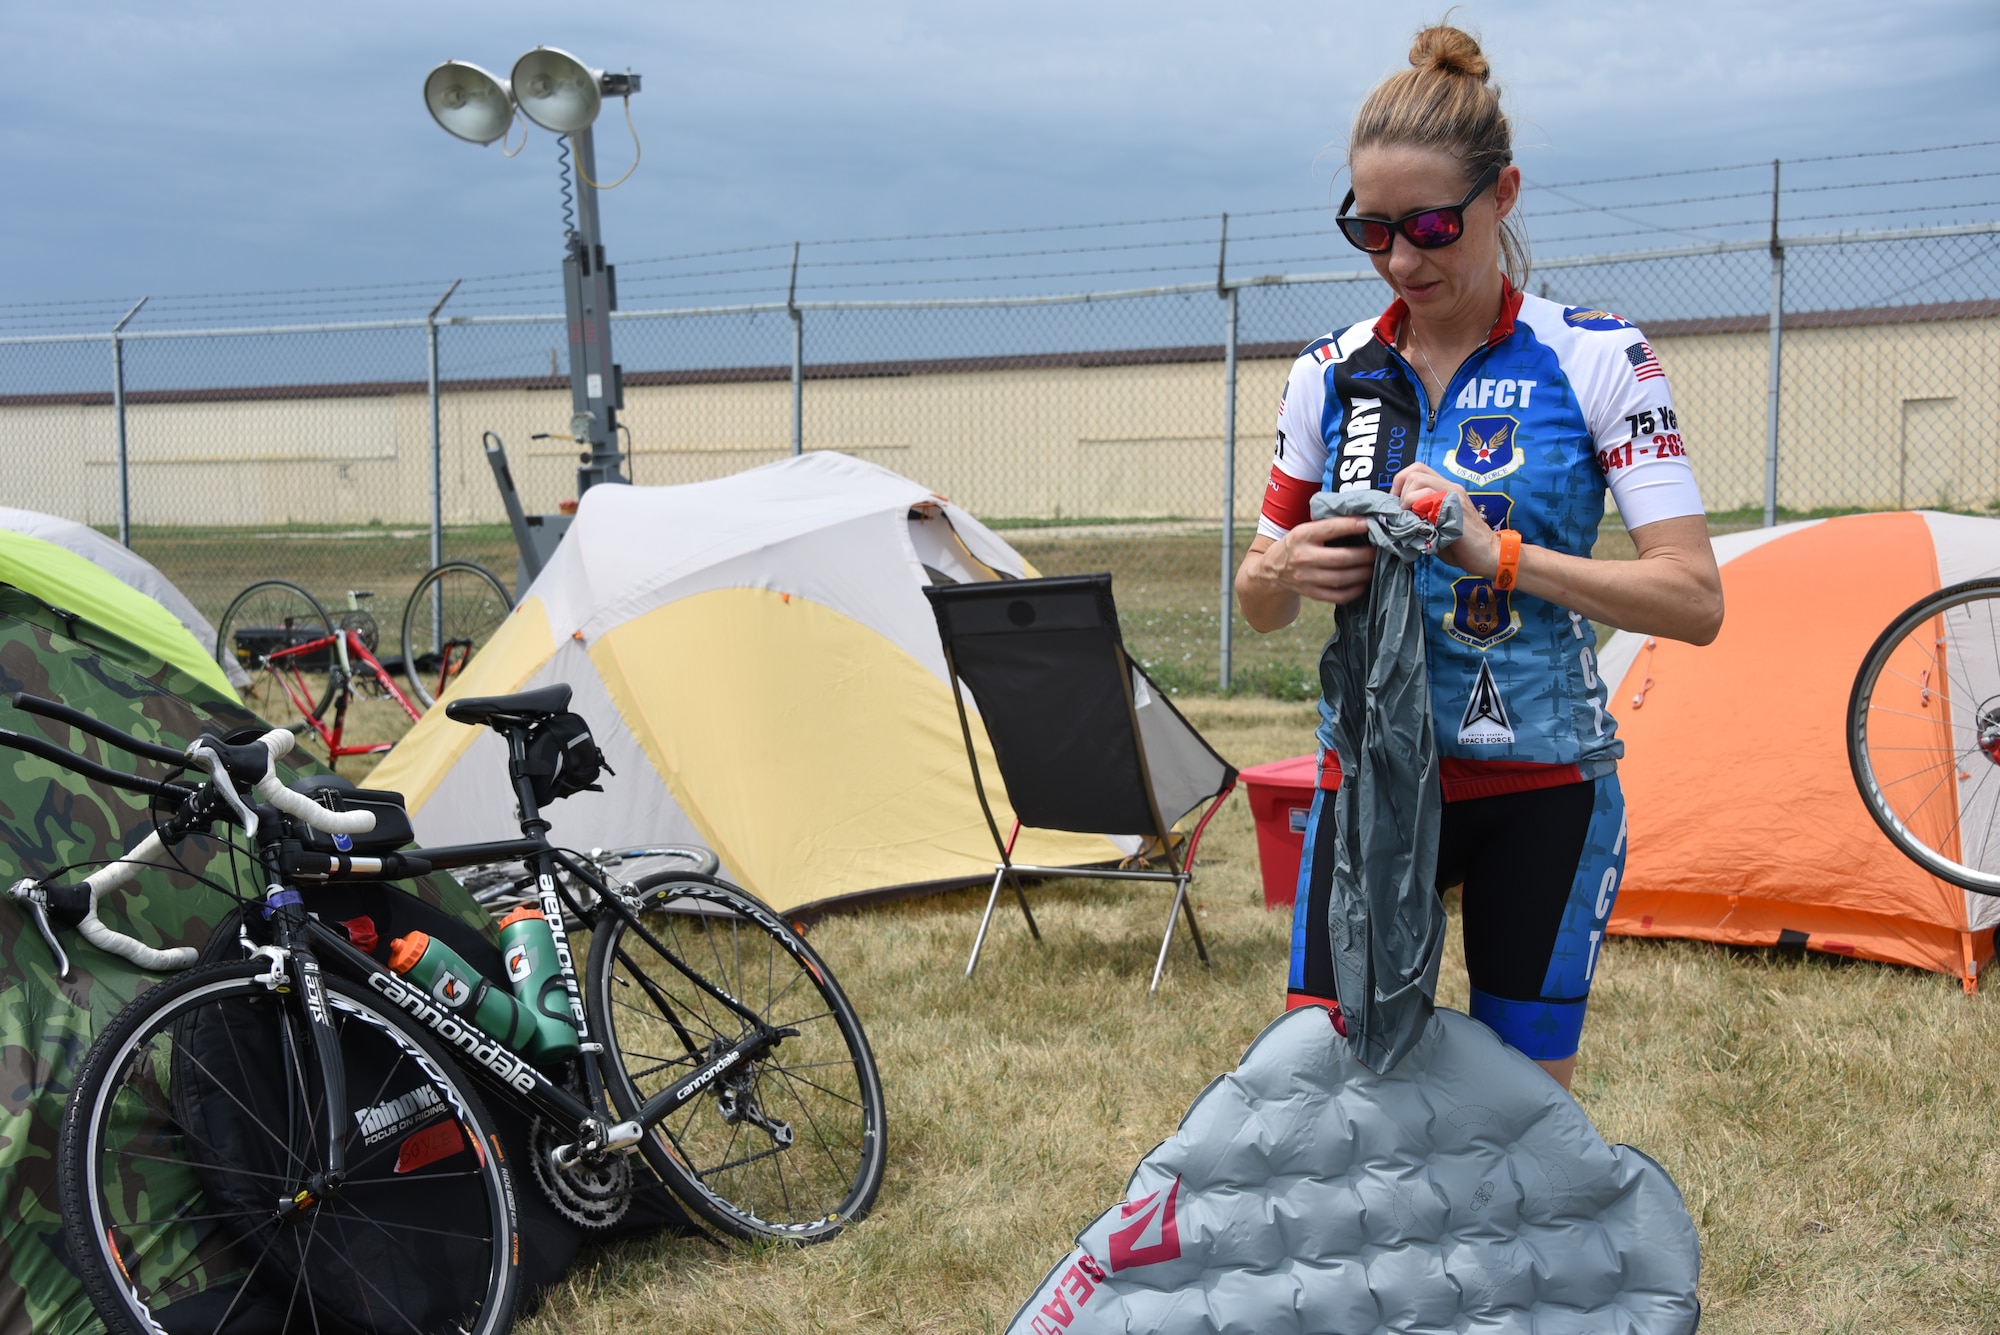 An AFCT member sets up her camping equipment